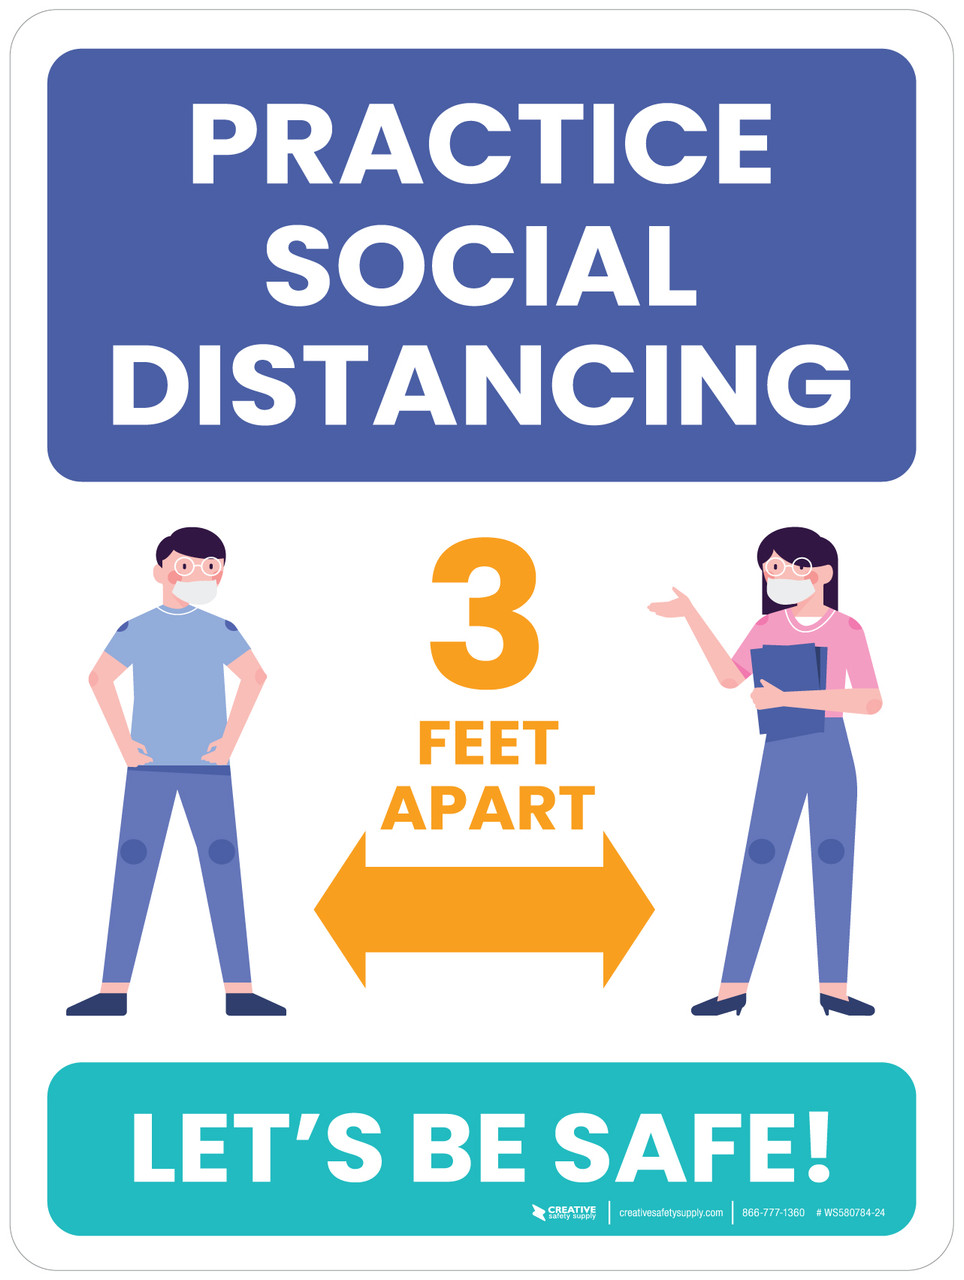 School Safety: Practice Social Distancing 3 Feet Apart - Let's Be Safe ...